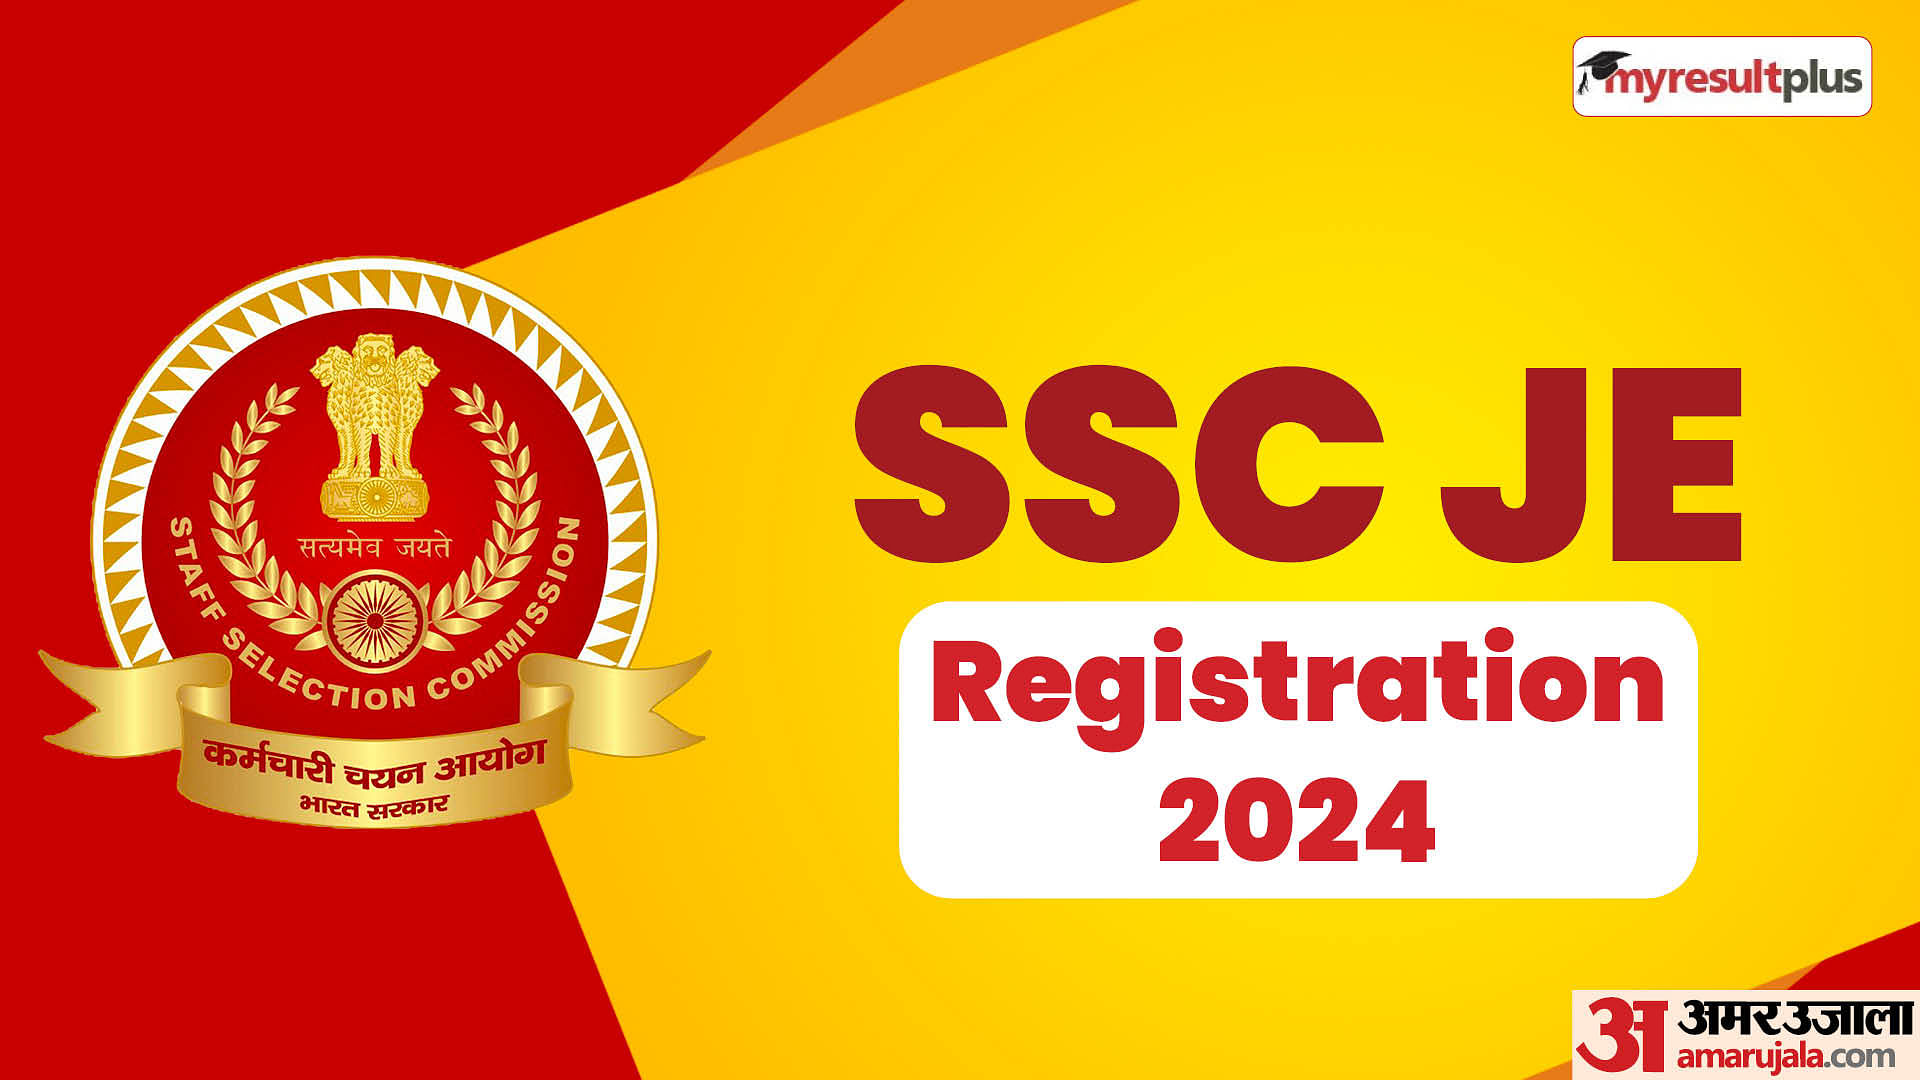 SSC JE Registration Window 2024 closing today, Submit applications at ssc.gov.in, Read here